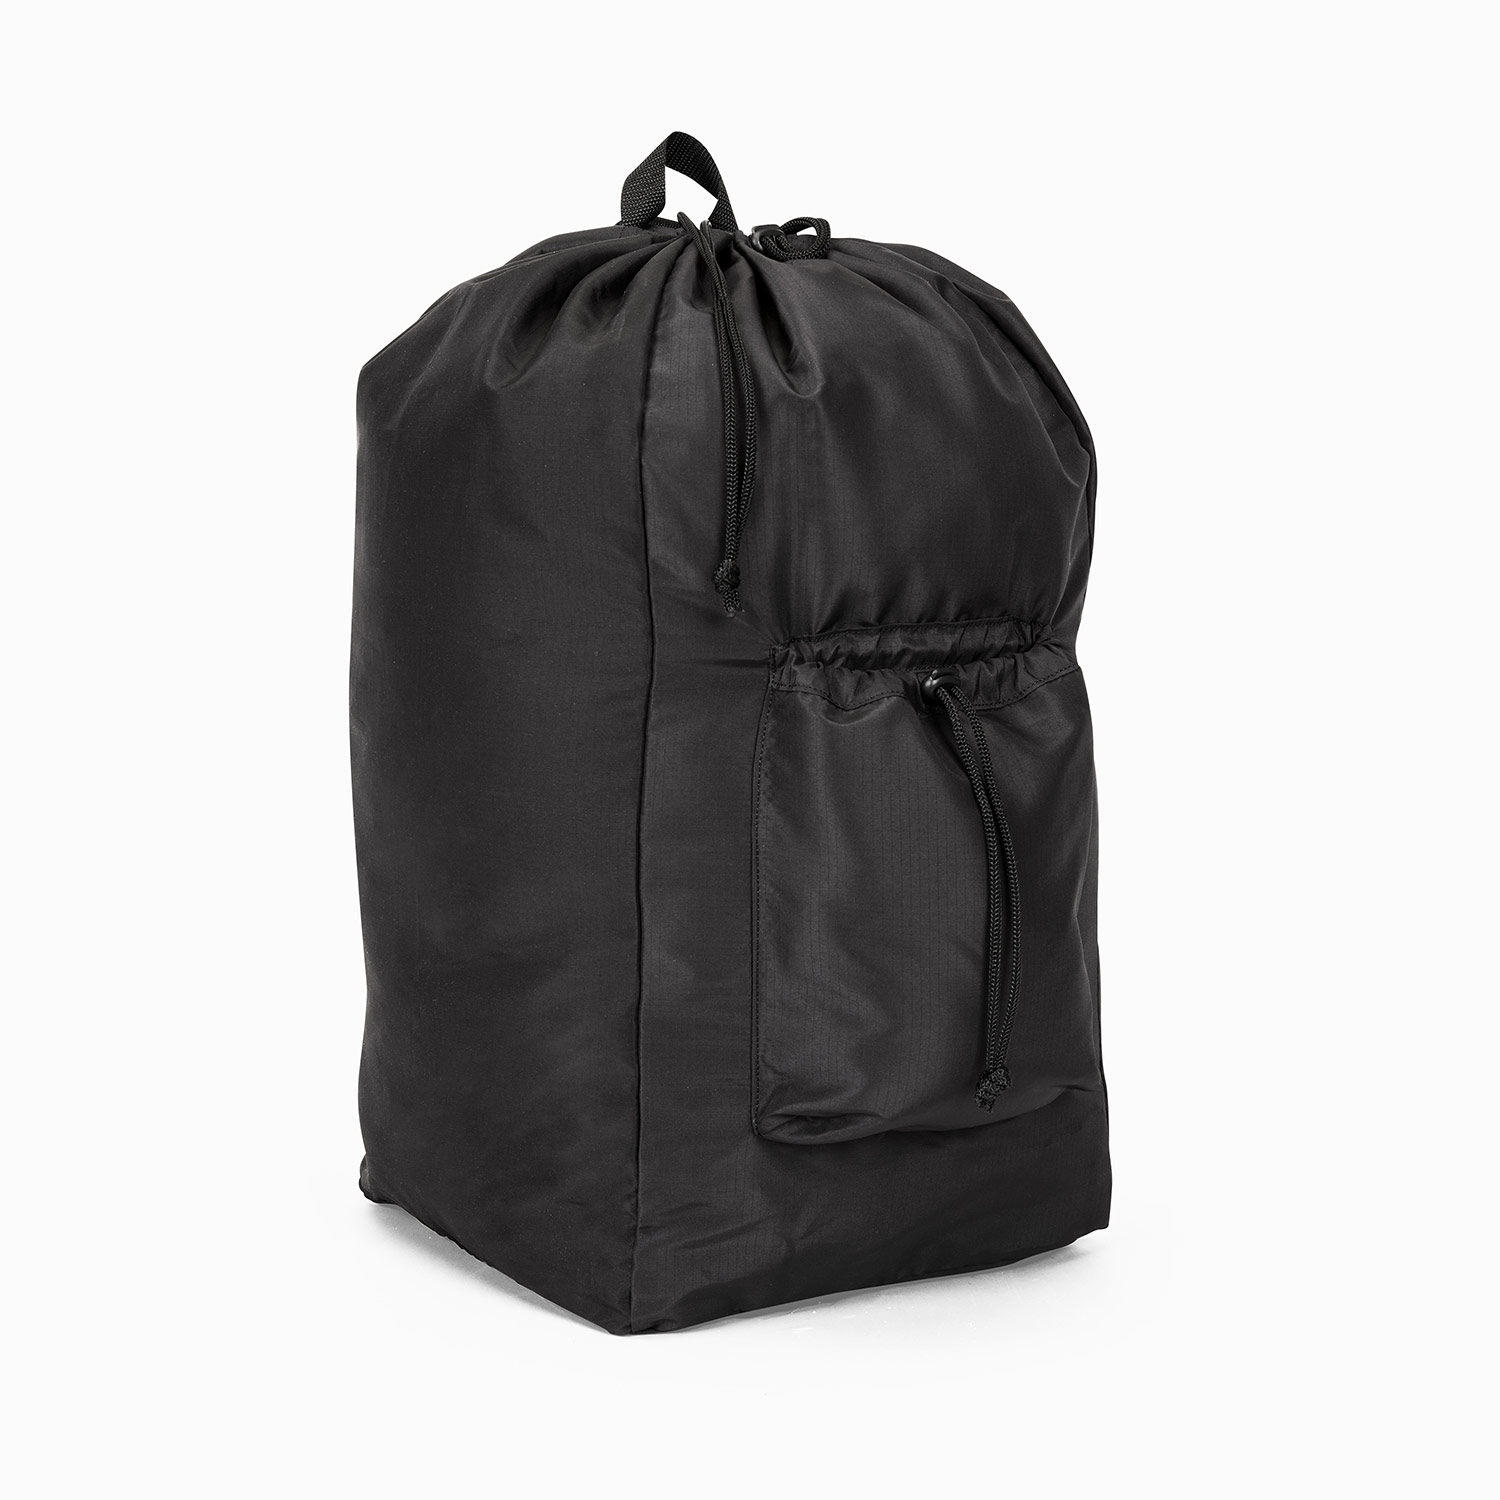 Black - Drawstring Laundry Bag - Thirty-One Gifts - Affordable Purses,  Totes & Bags